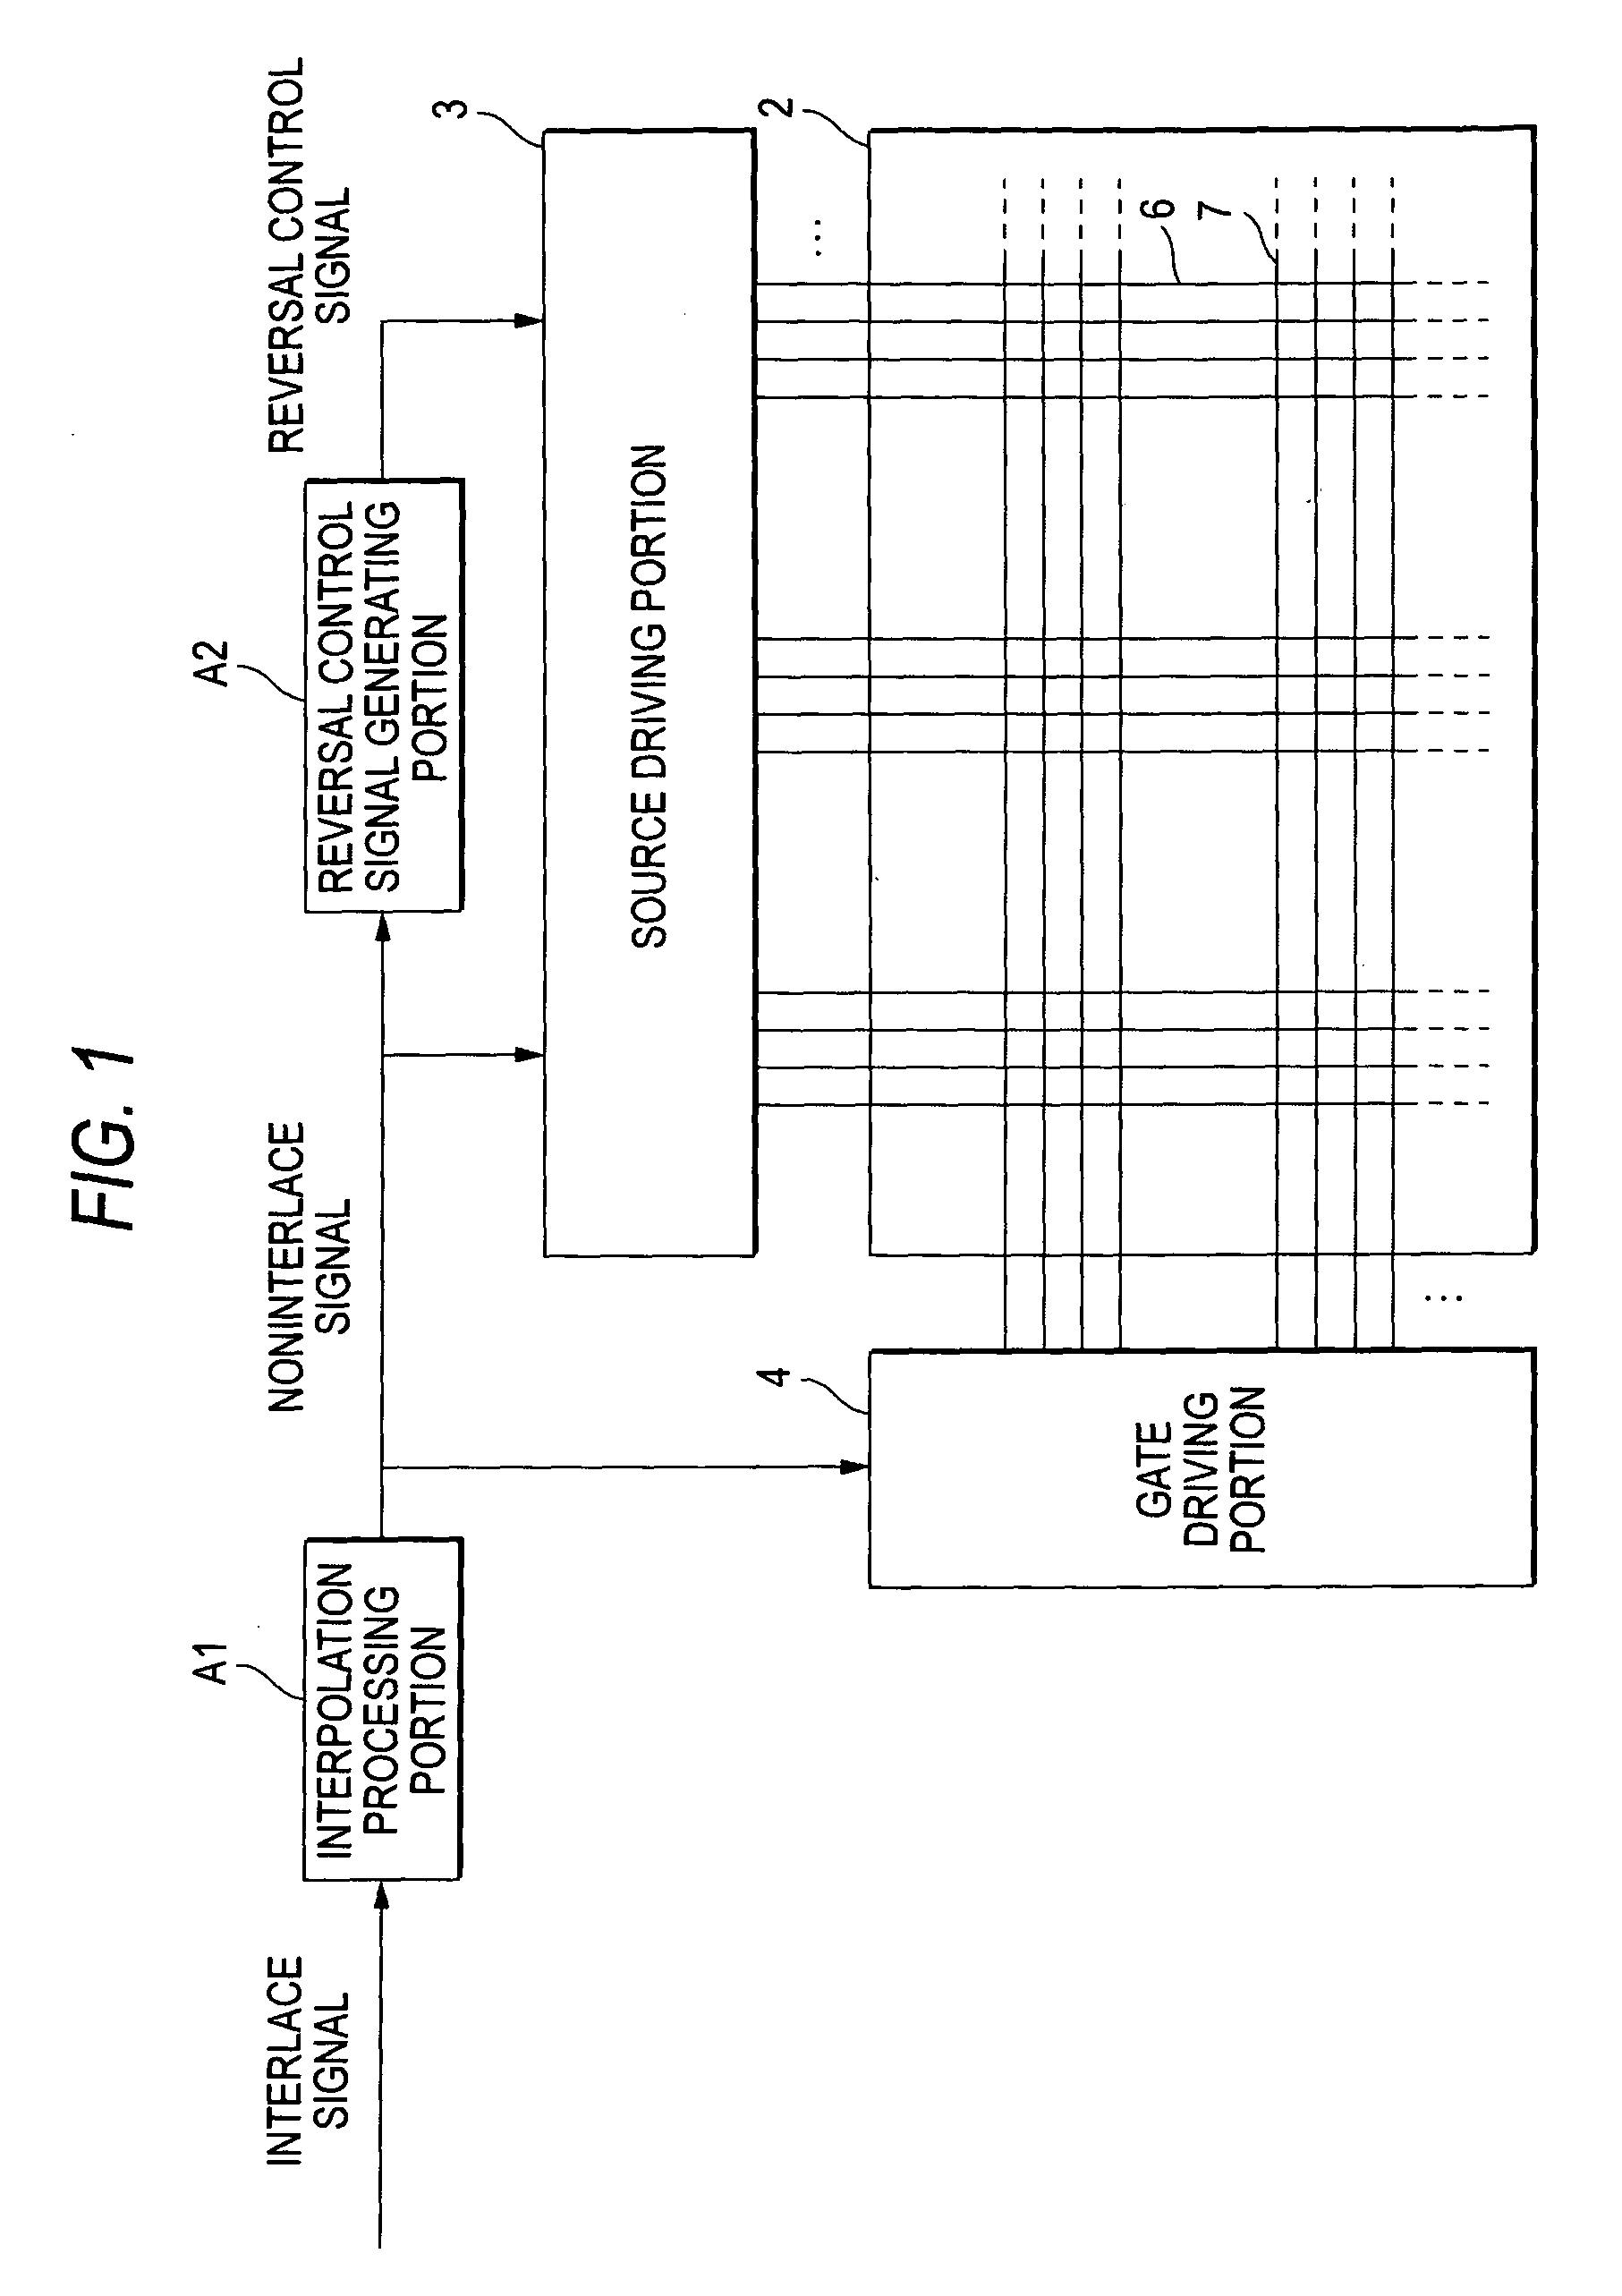 Liquid crystal display apparatus and alternating current driving method therefore